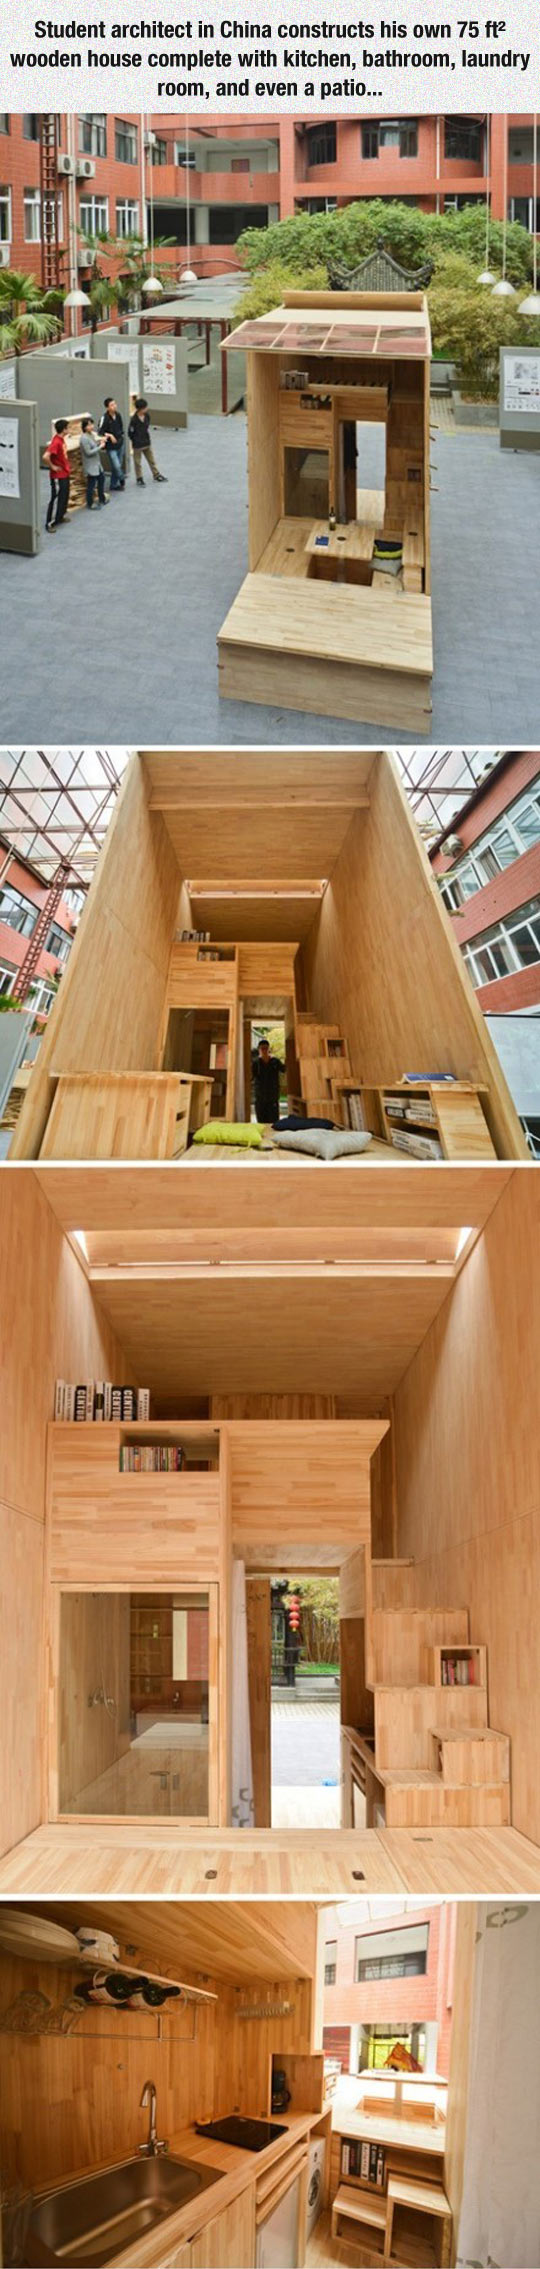 cool-wooden-house-China-small